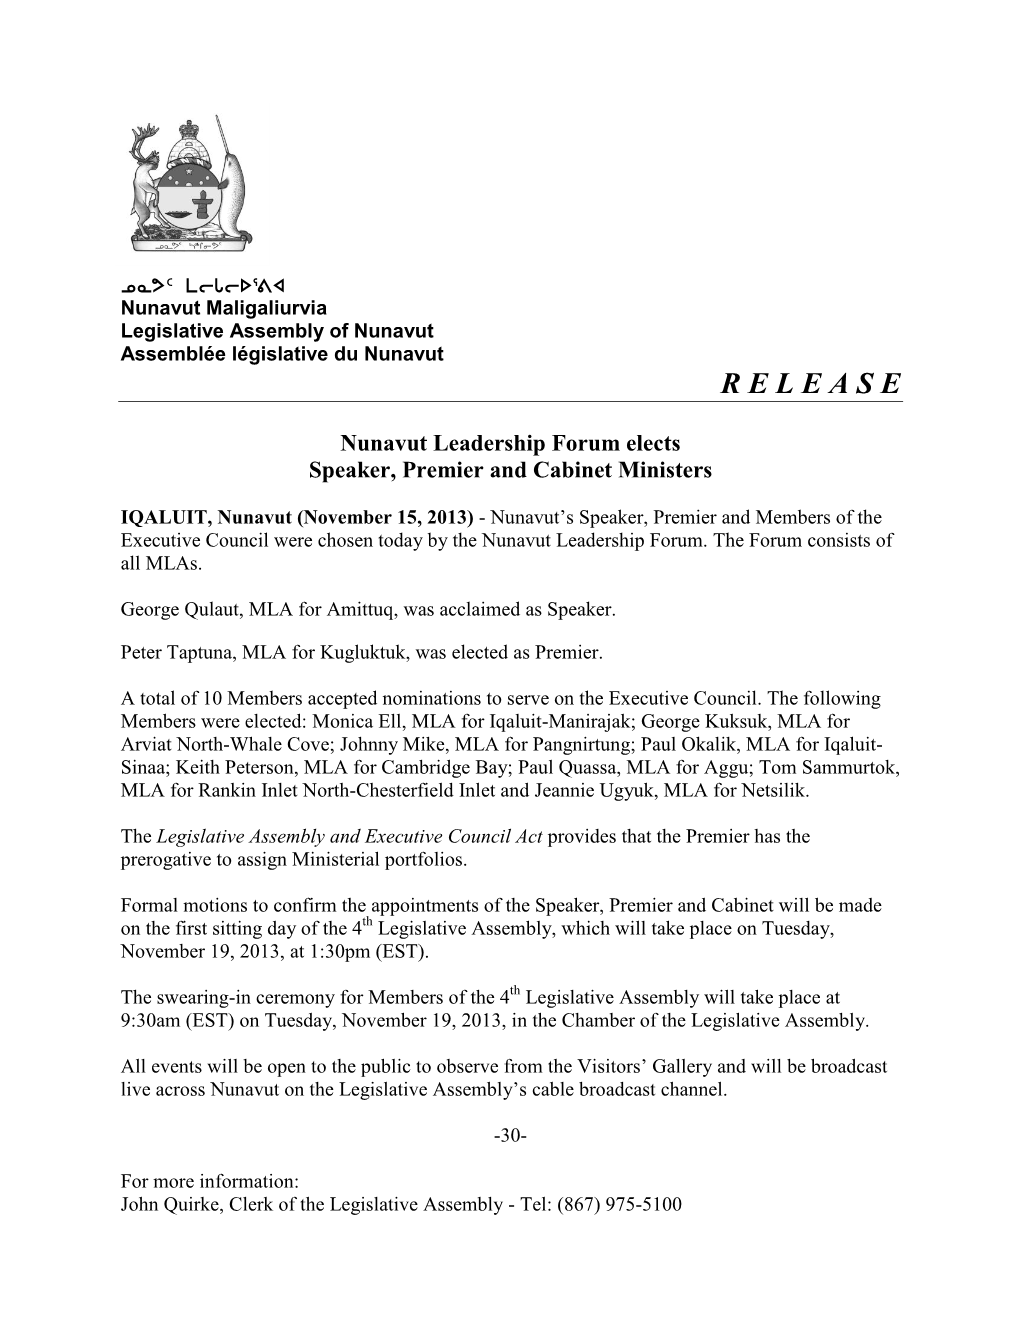 Nunavut Leadership Forum Elects Speaker, Premier and Cabinet Ministers